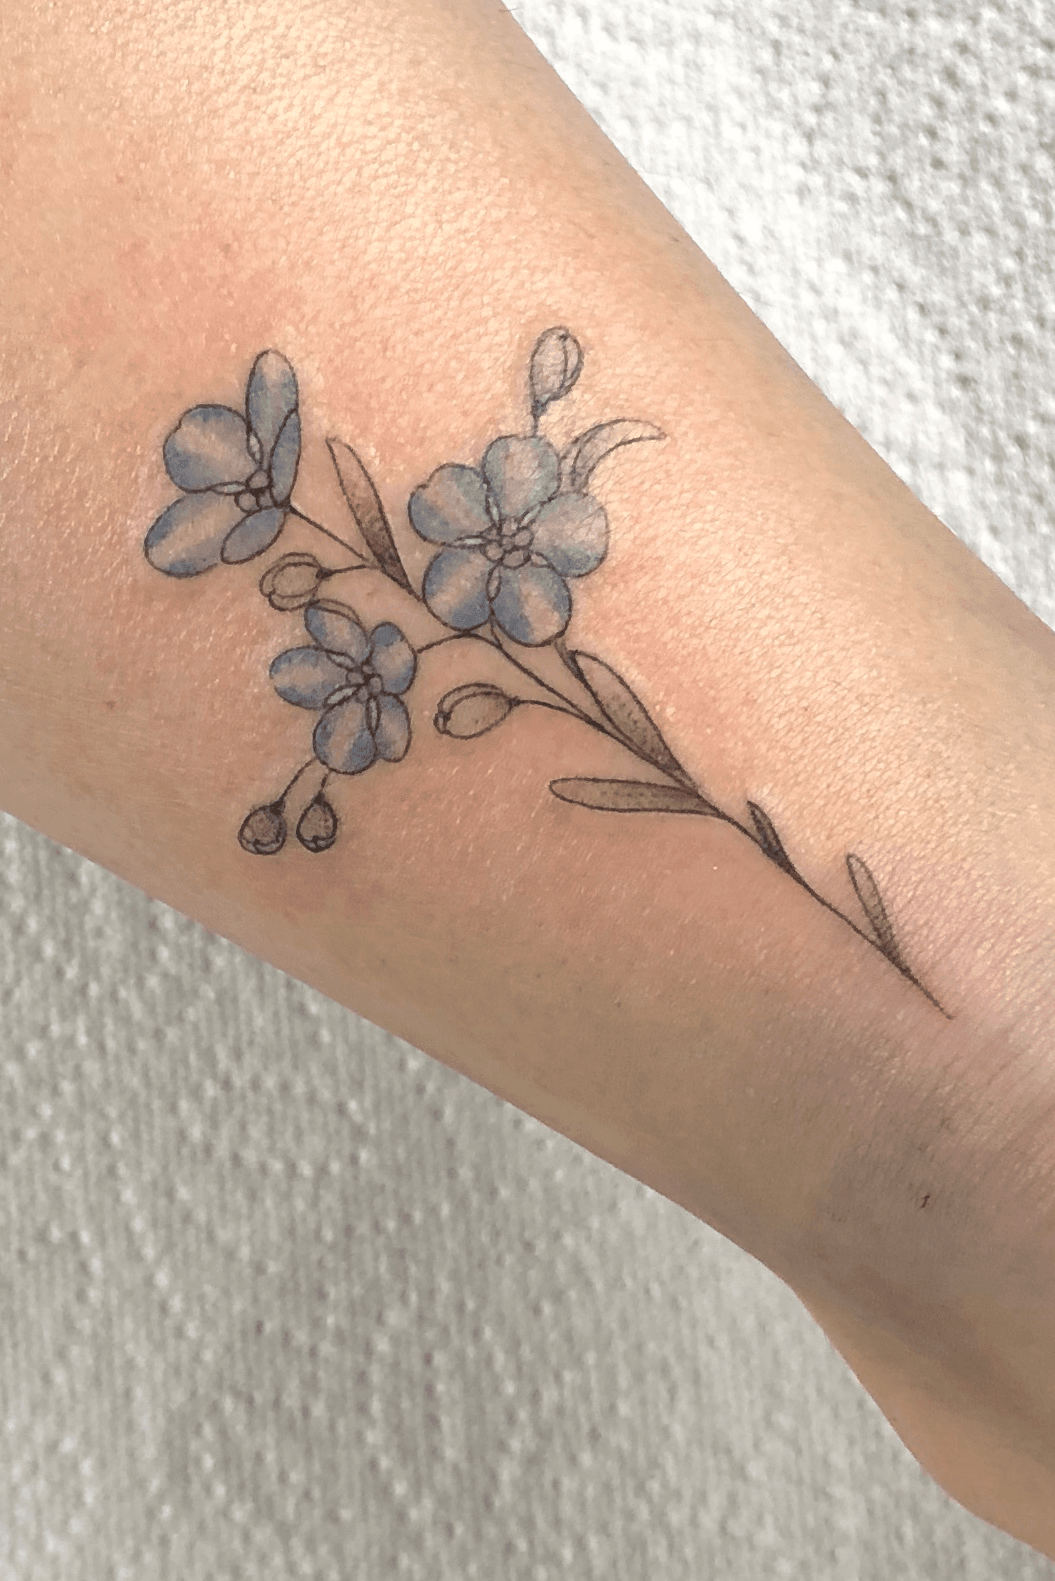 Forget Me Not Tattoo Meaning And Most Beautiful Ideas For Inspiration